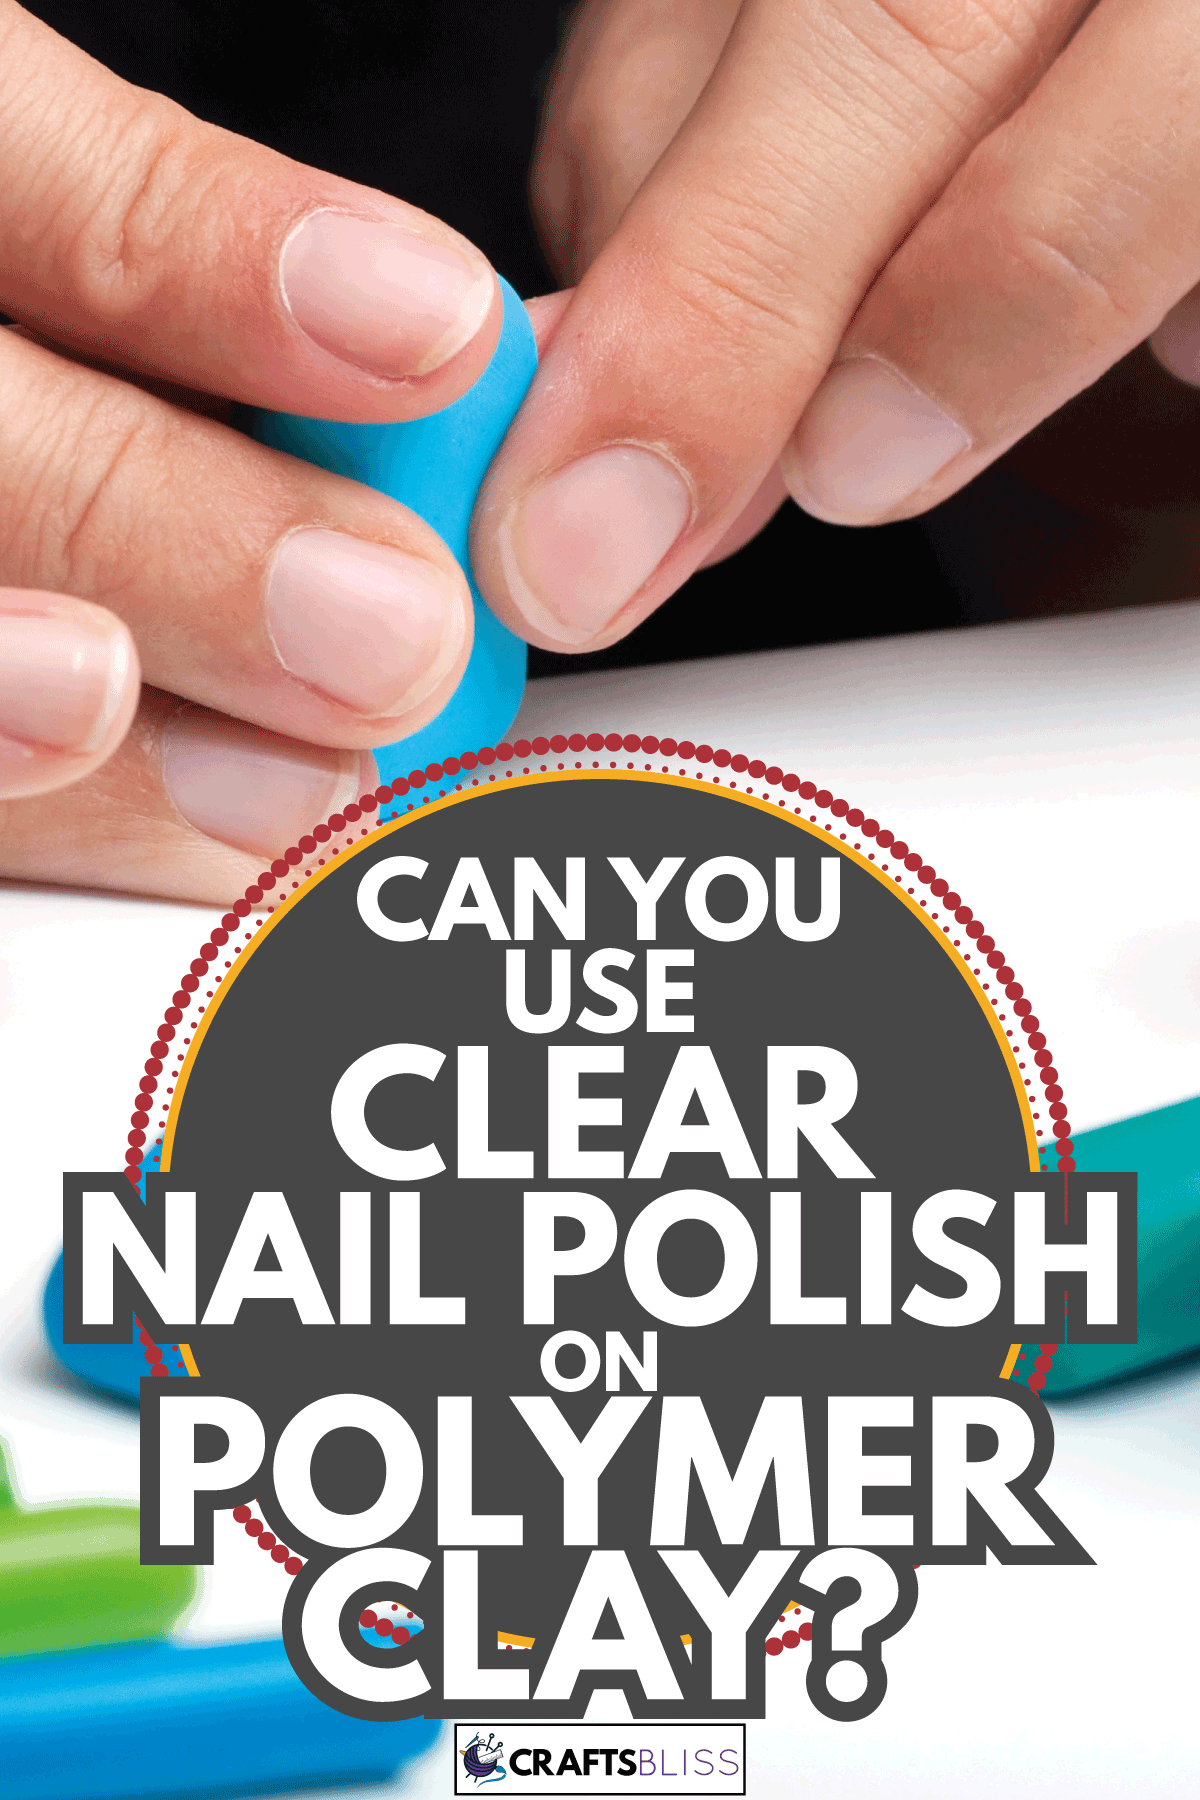 womans hands rolling polymer clay. Can You Use Clear Nail Polish On Polymer Clay